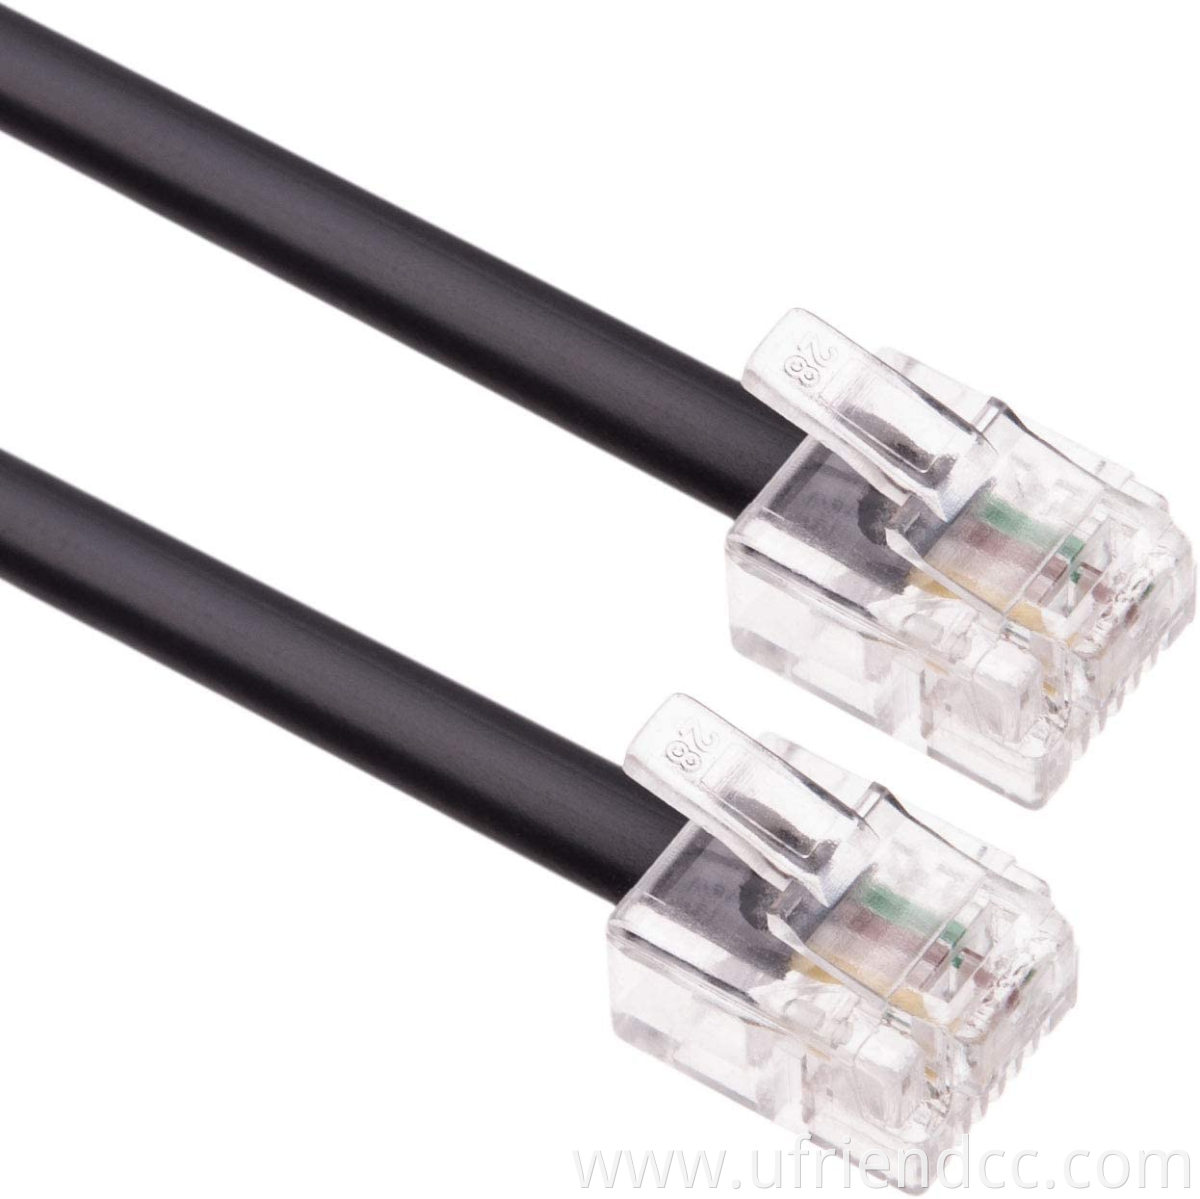 RJ11 6P4C Male to Male Router and Mode Cable Phone Cord Telephone Plug High Speed Internet Broadband